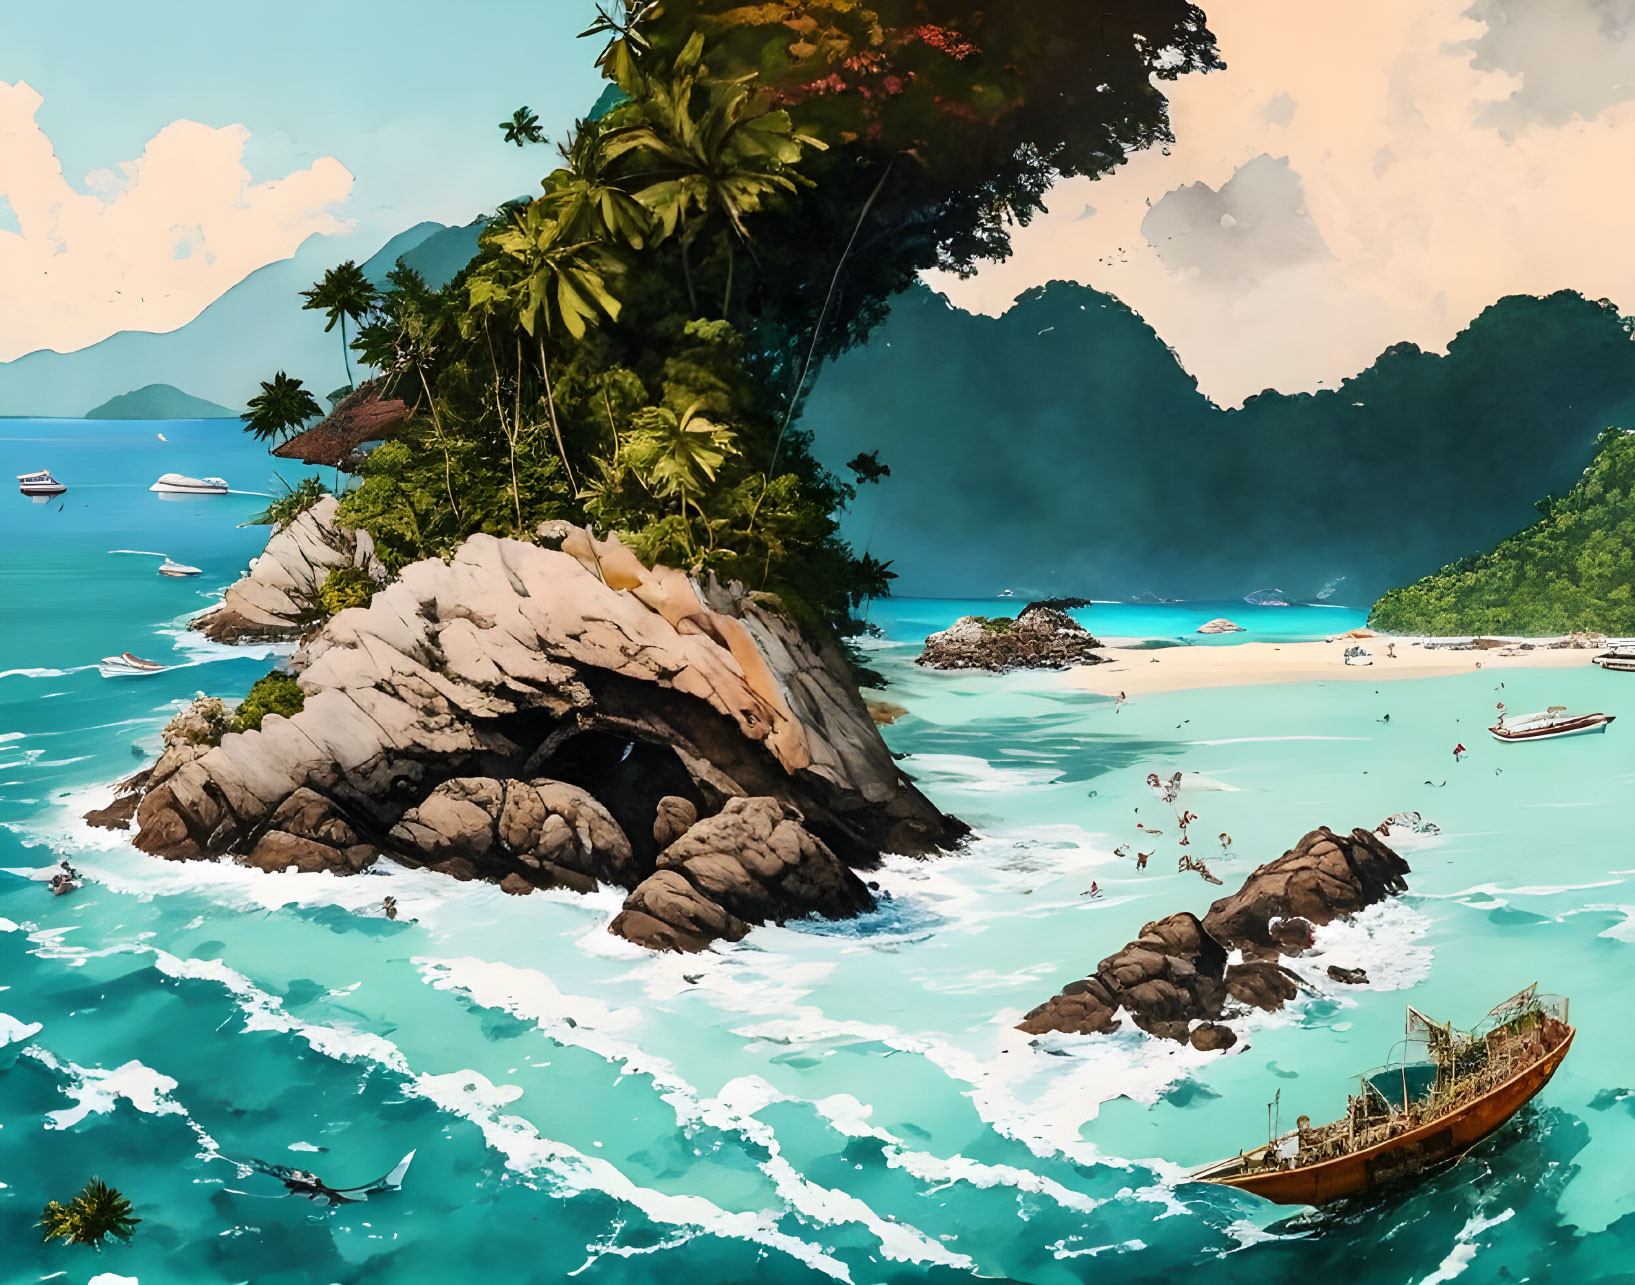 Tropical beach scene with turquoise waters, rocky outcrop, lush greenery, and boats under h